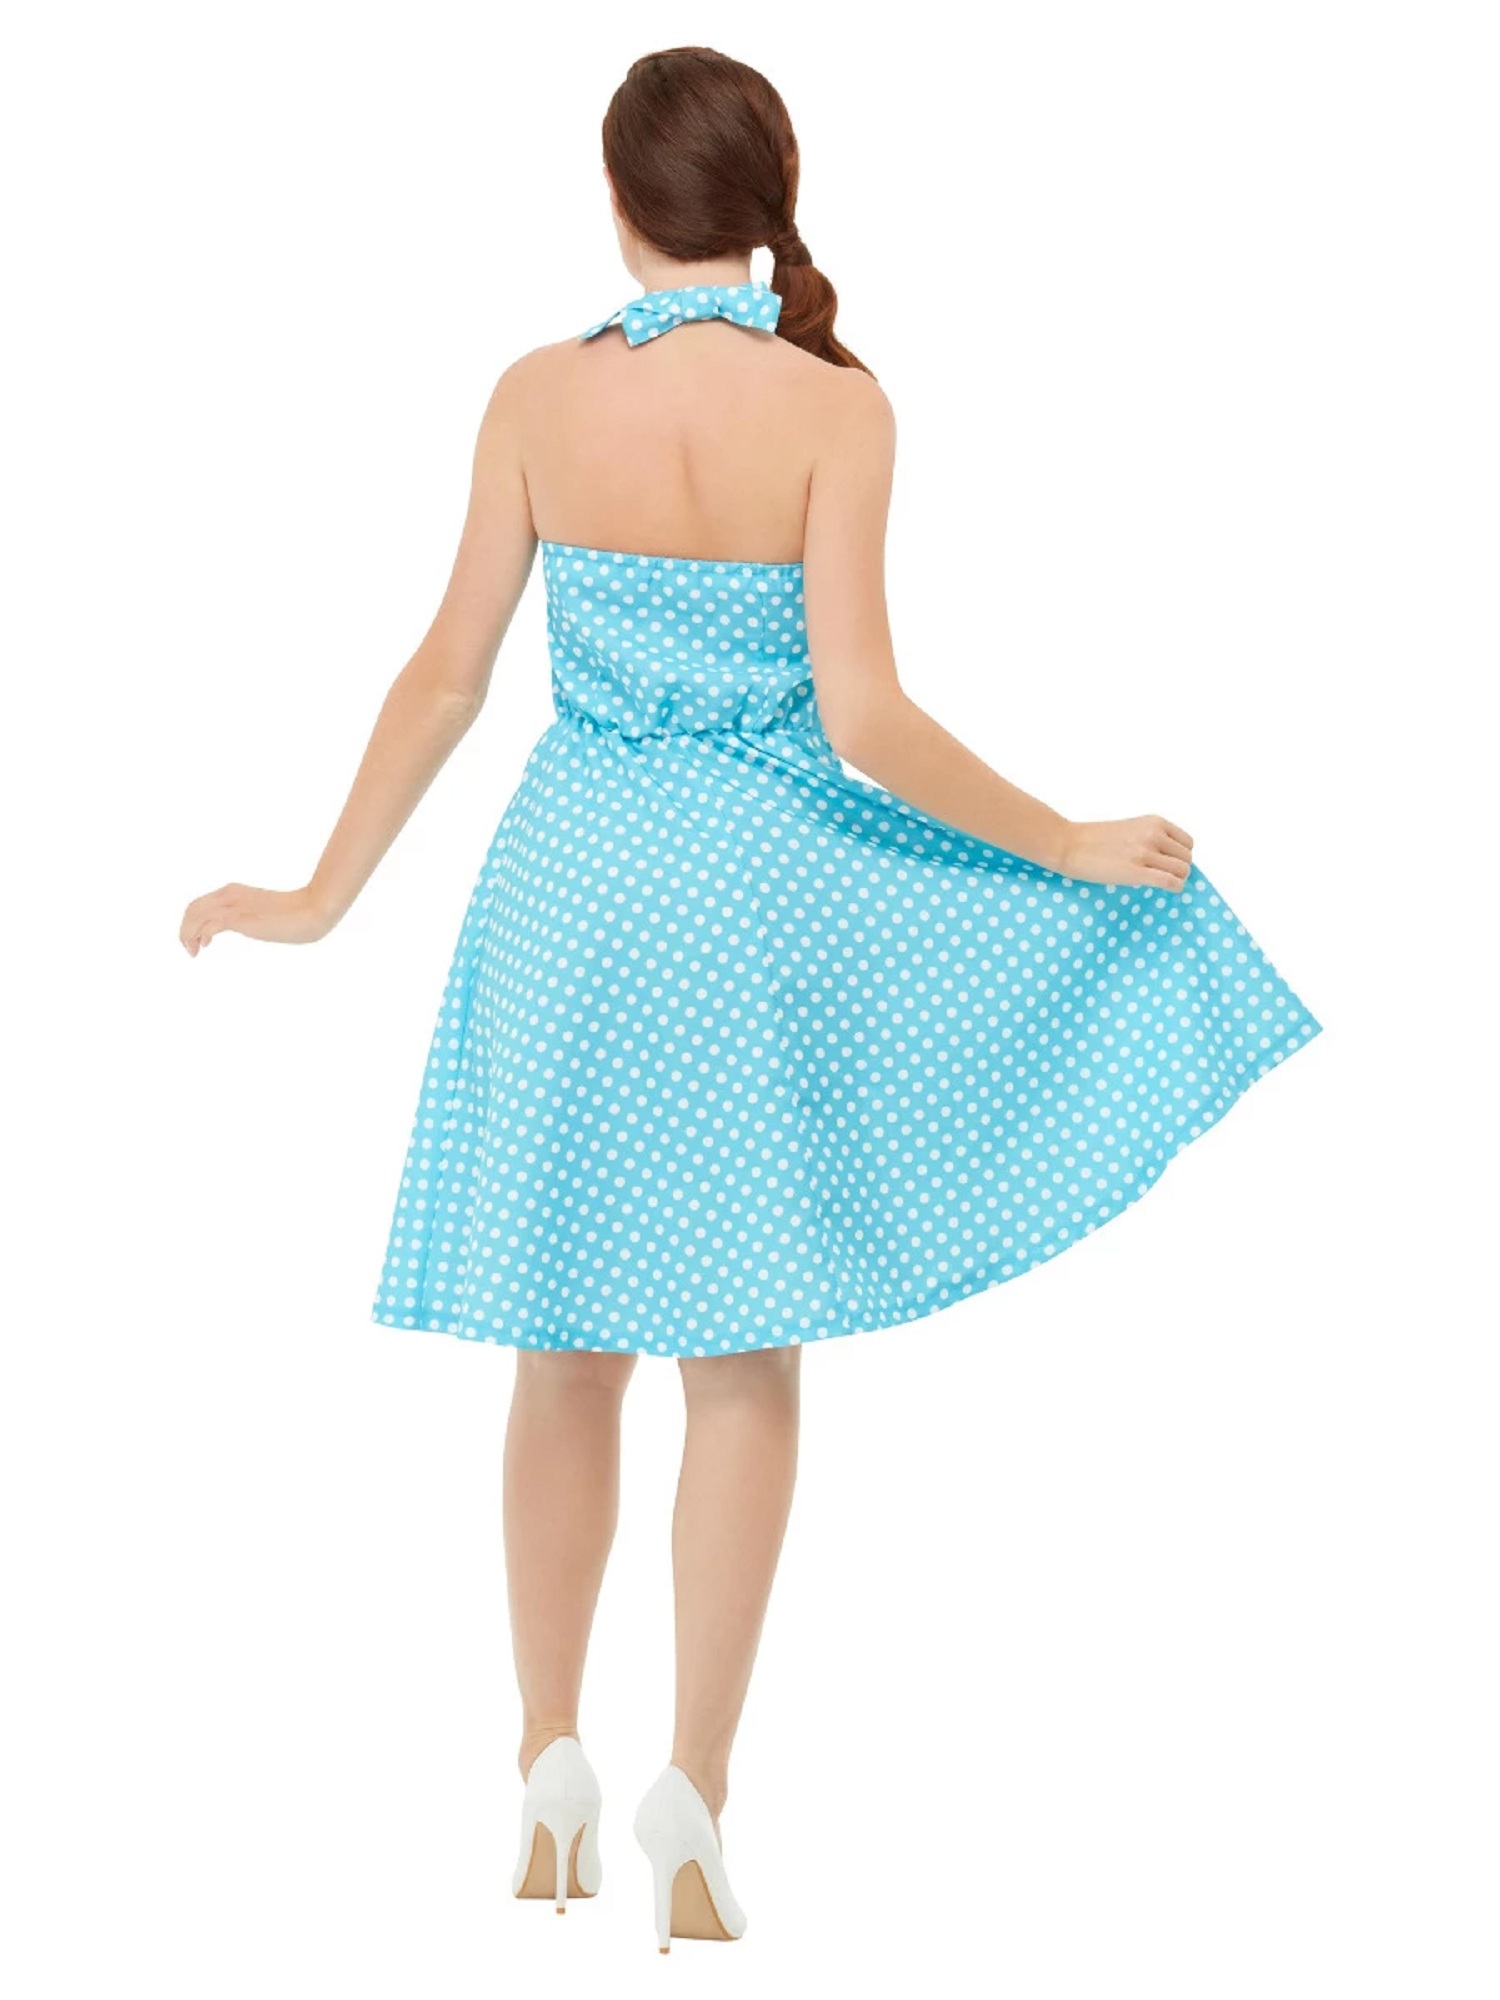 Smiffys 41" Blue and White 1950's Style Pin Up Women Adult Halloween Costume - Small